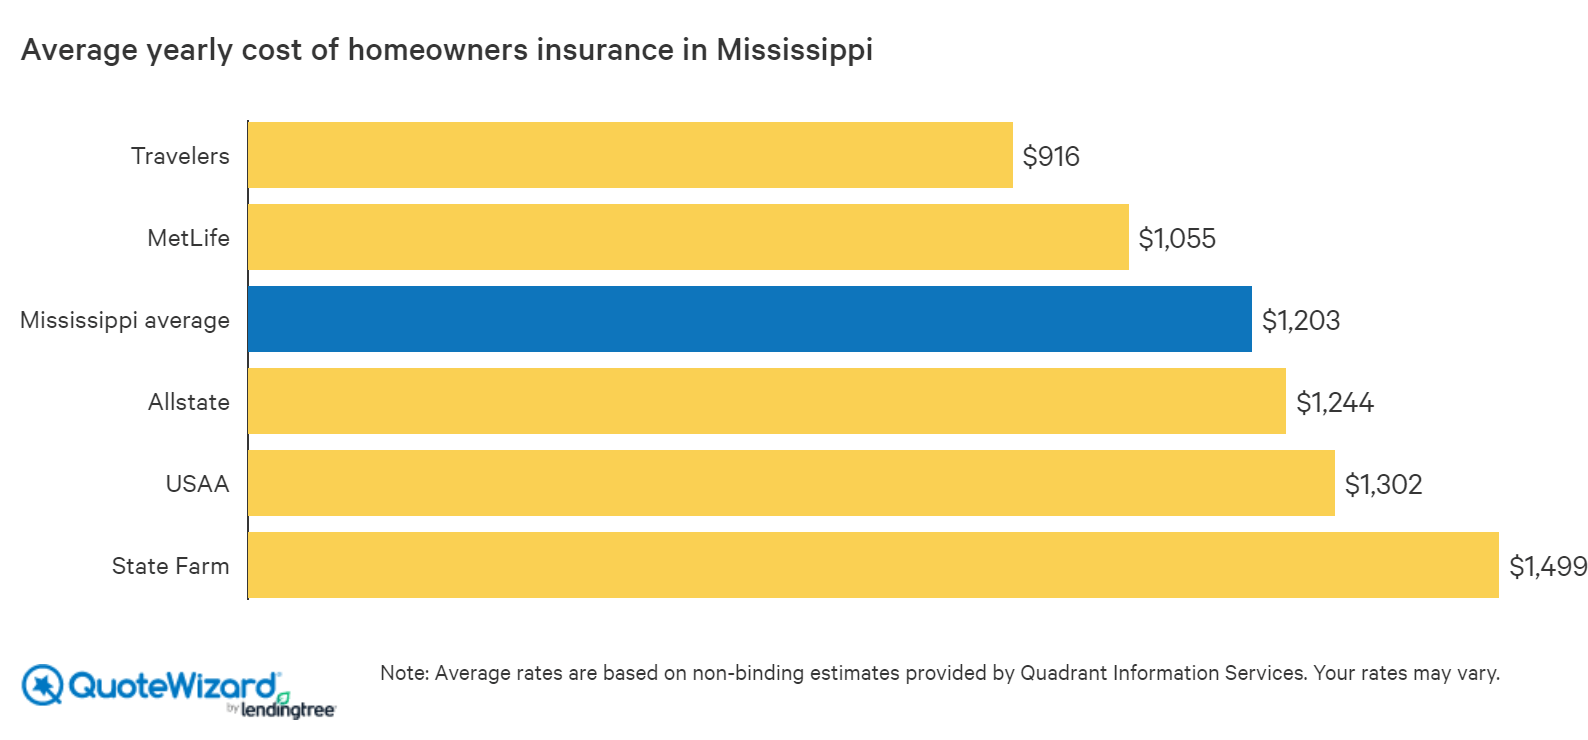 Compare Homeowners Insurance in Mississippi QuoteWizard